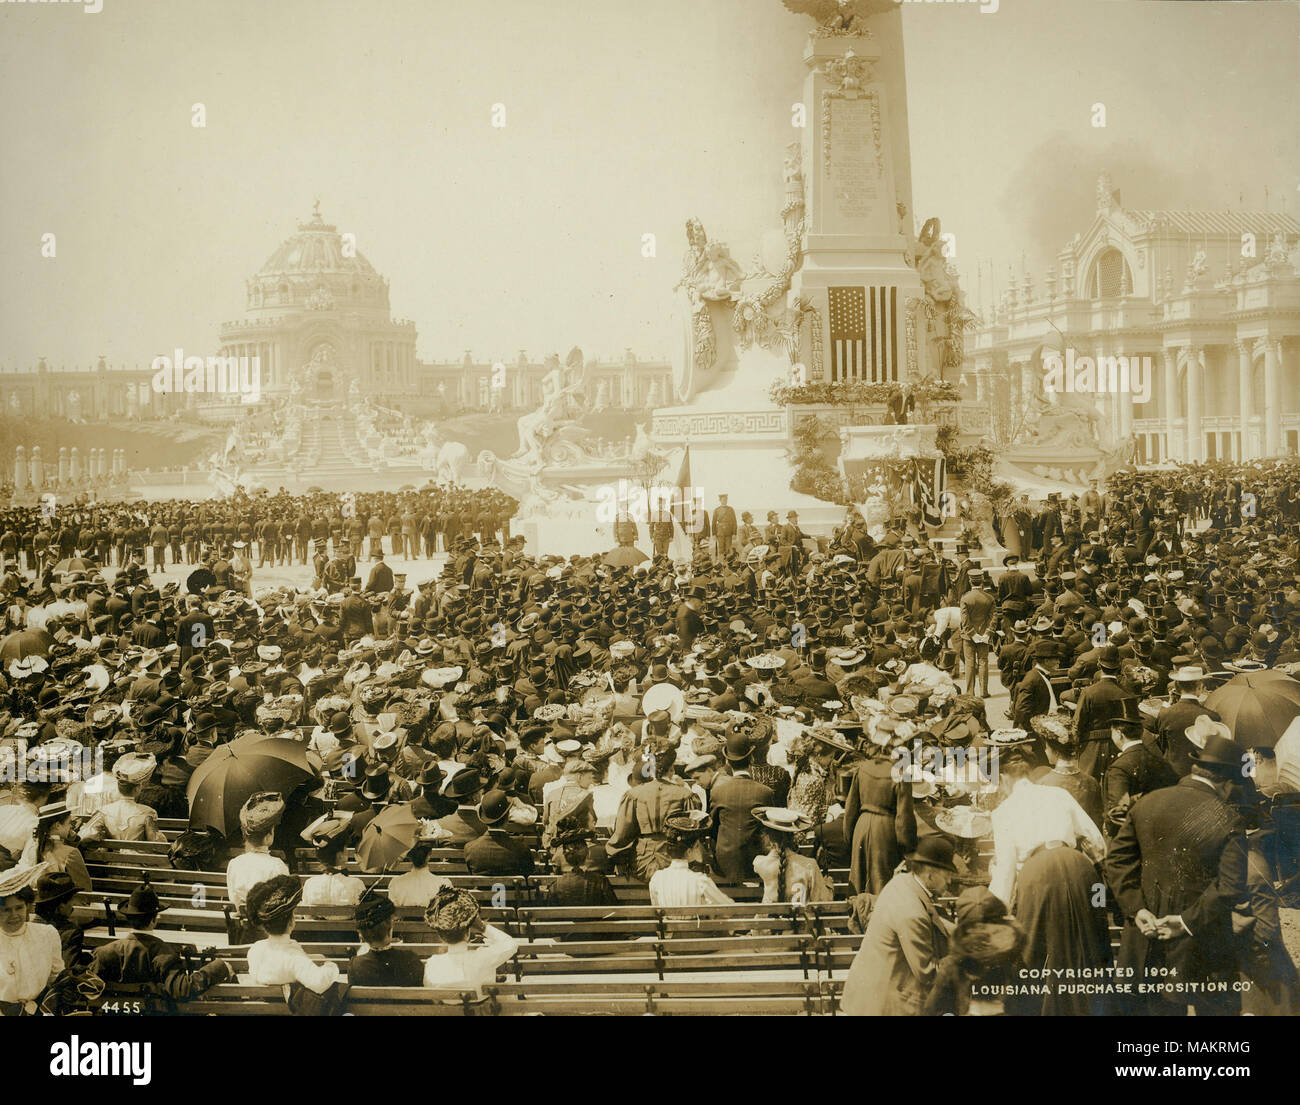 Title: Section of crowd in reserved seats listens to the address of Louisiana Purchase Exposition President David R. Francis on Opening Day of the 1904 World's Fair.  . 1904. Official Photographic Company Stock Photo